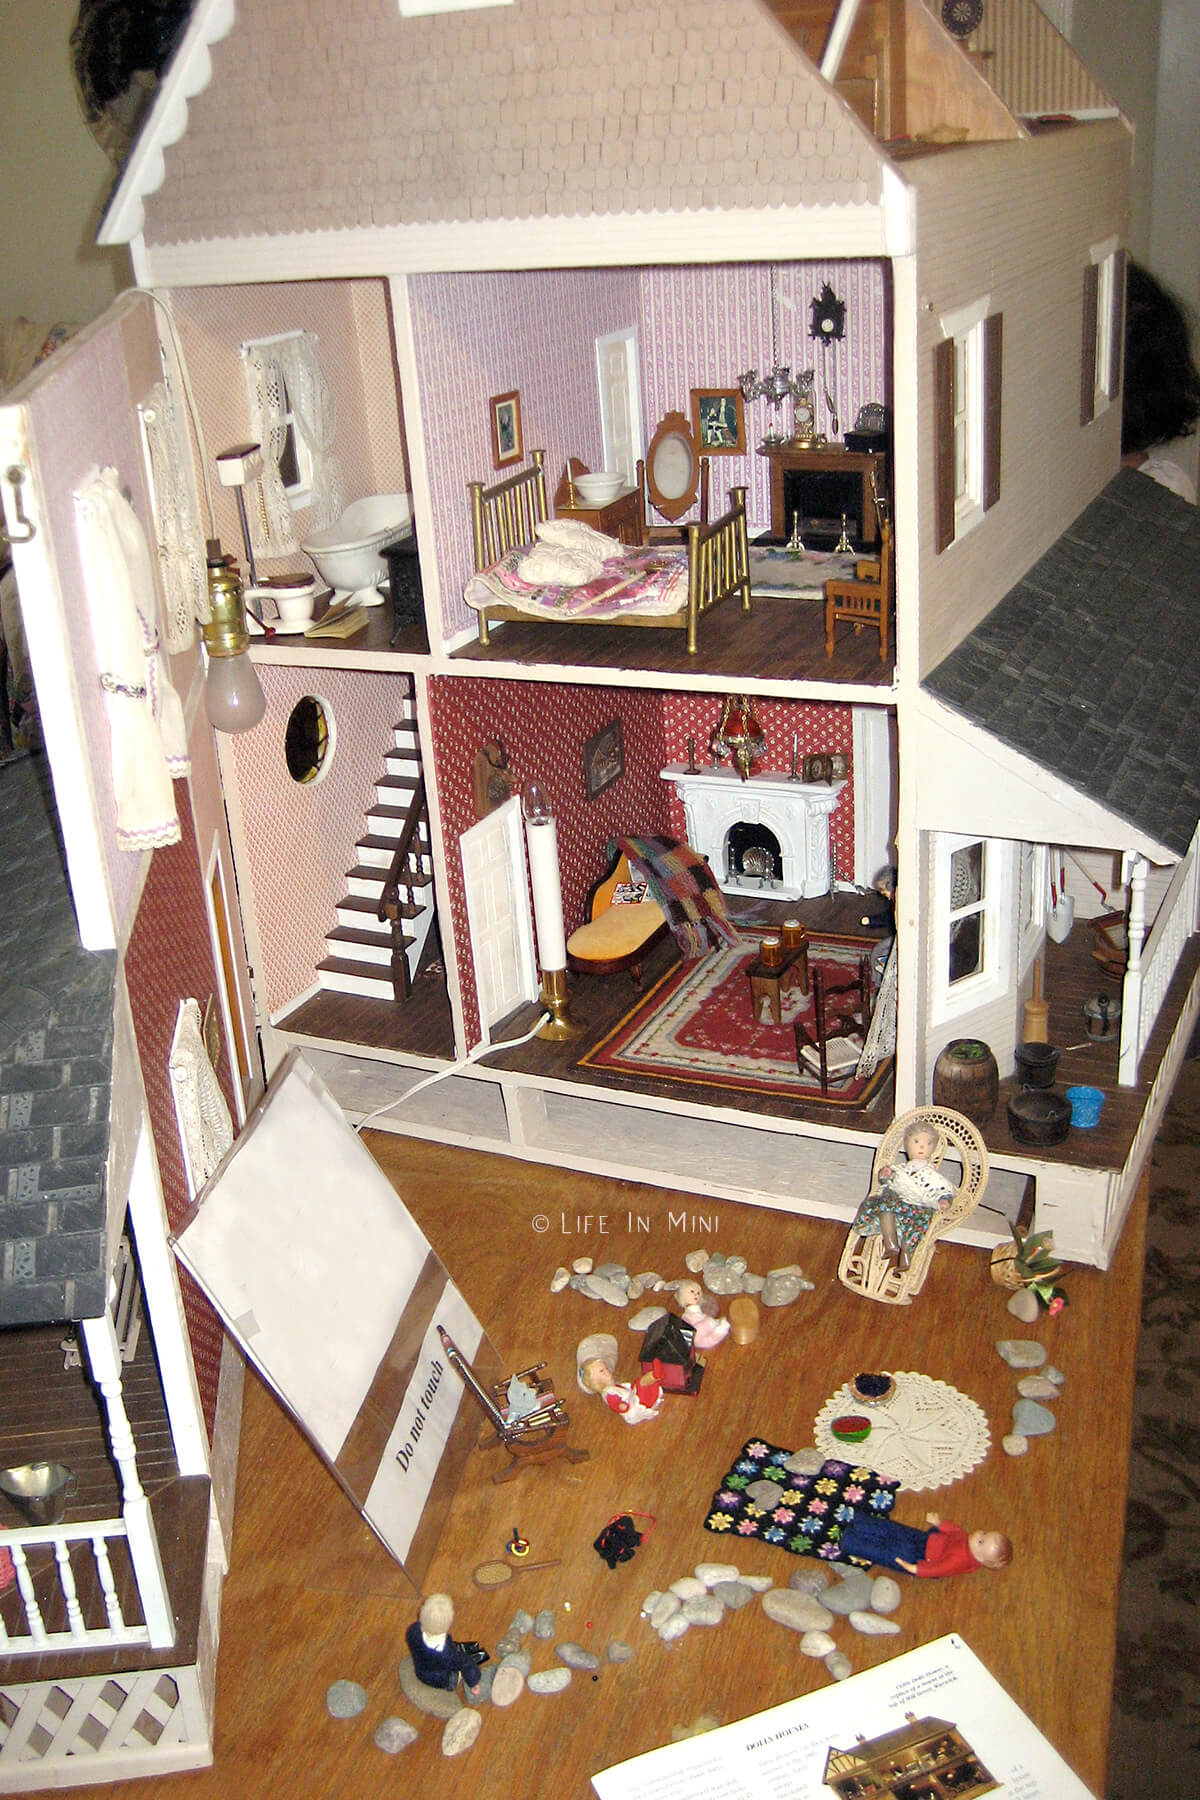 Used dollhouse with some furnishings in it from a second hand store